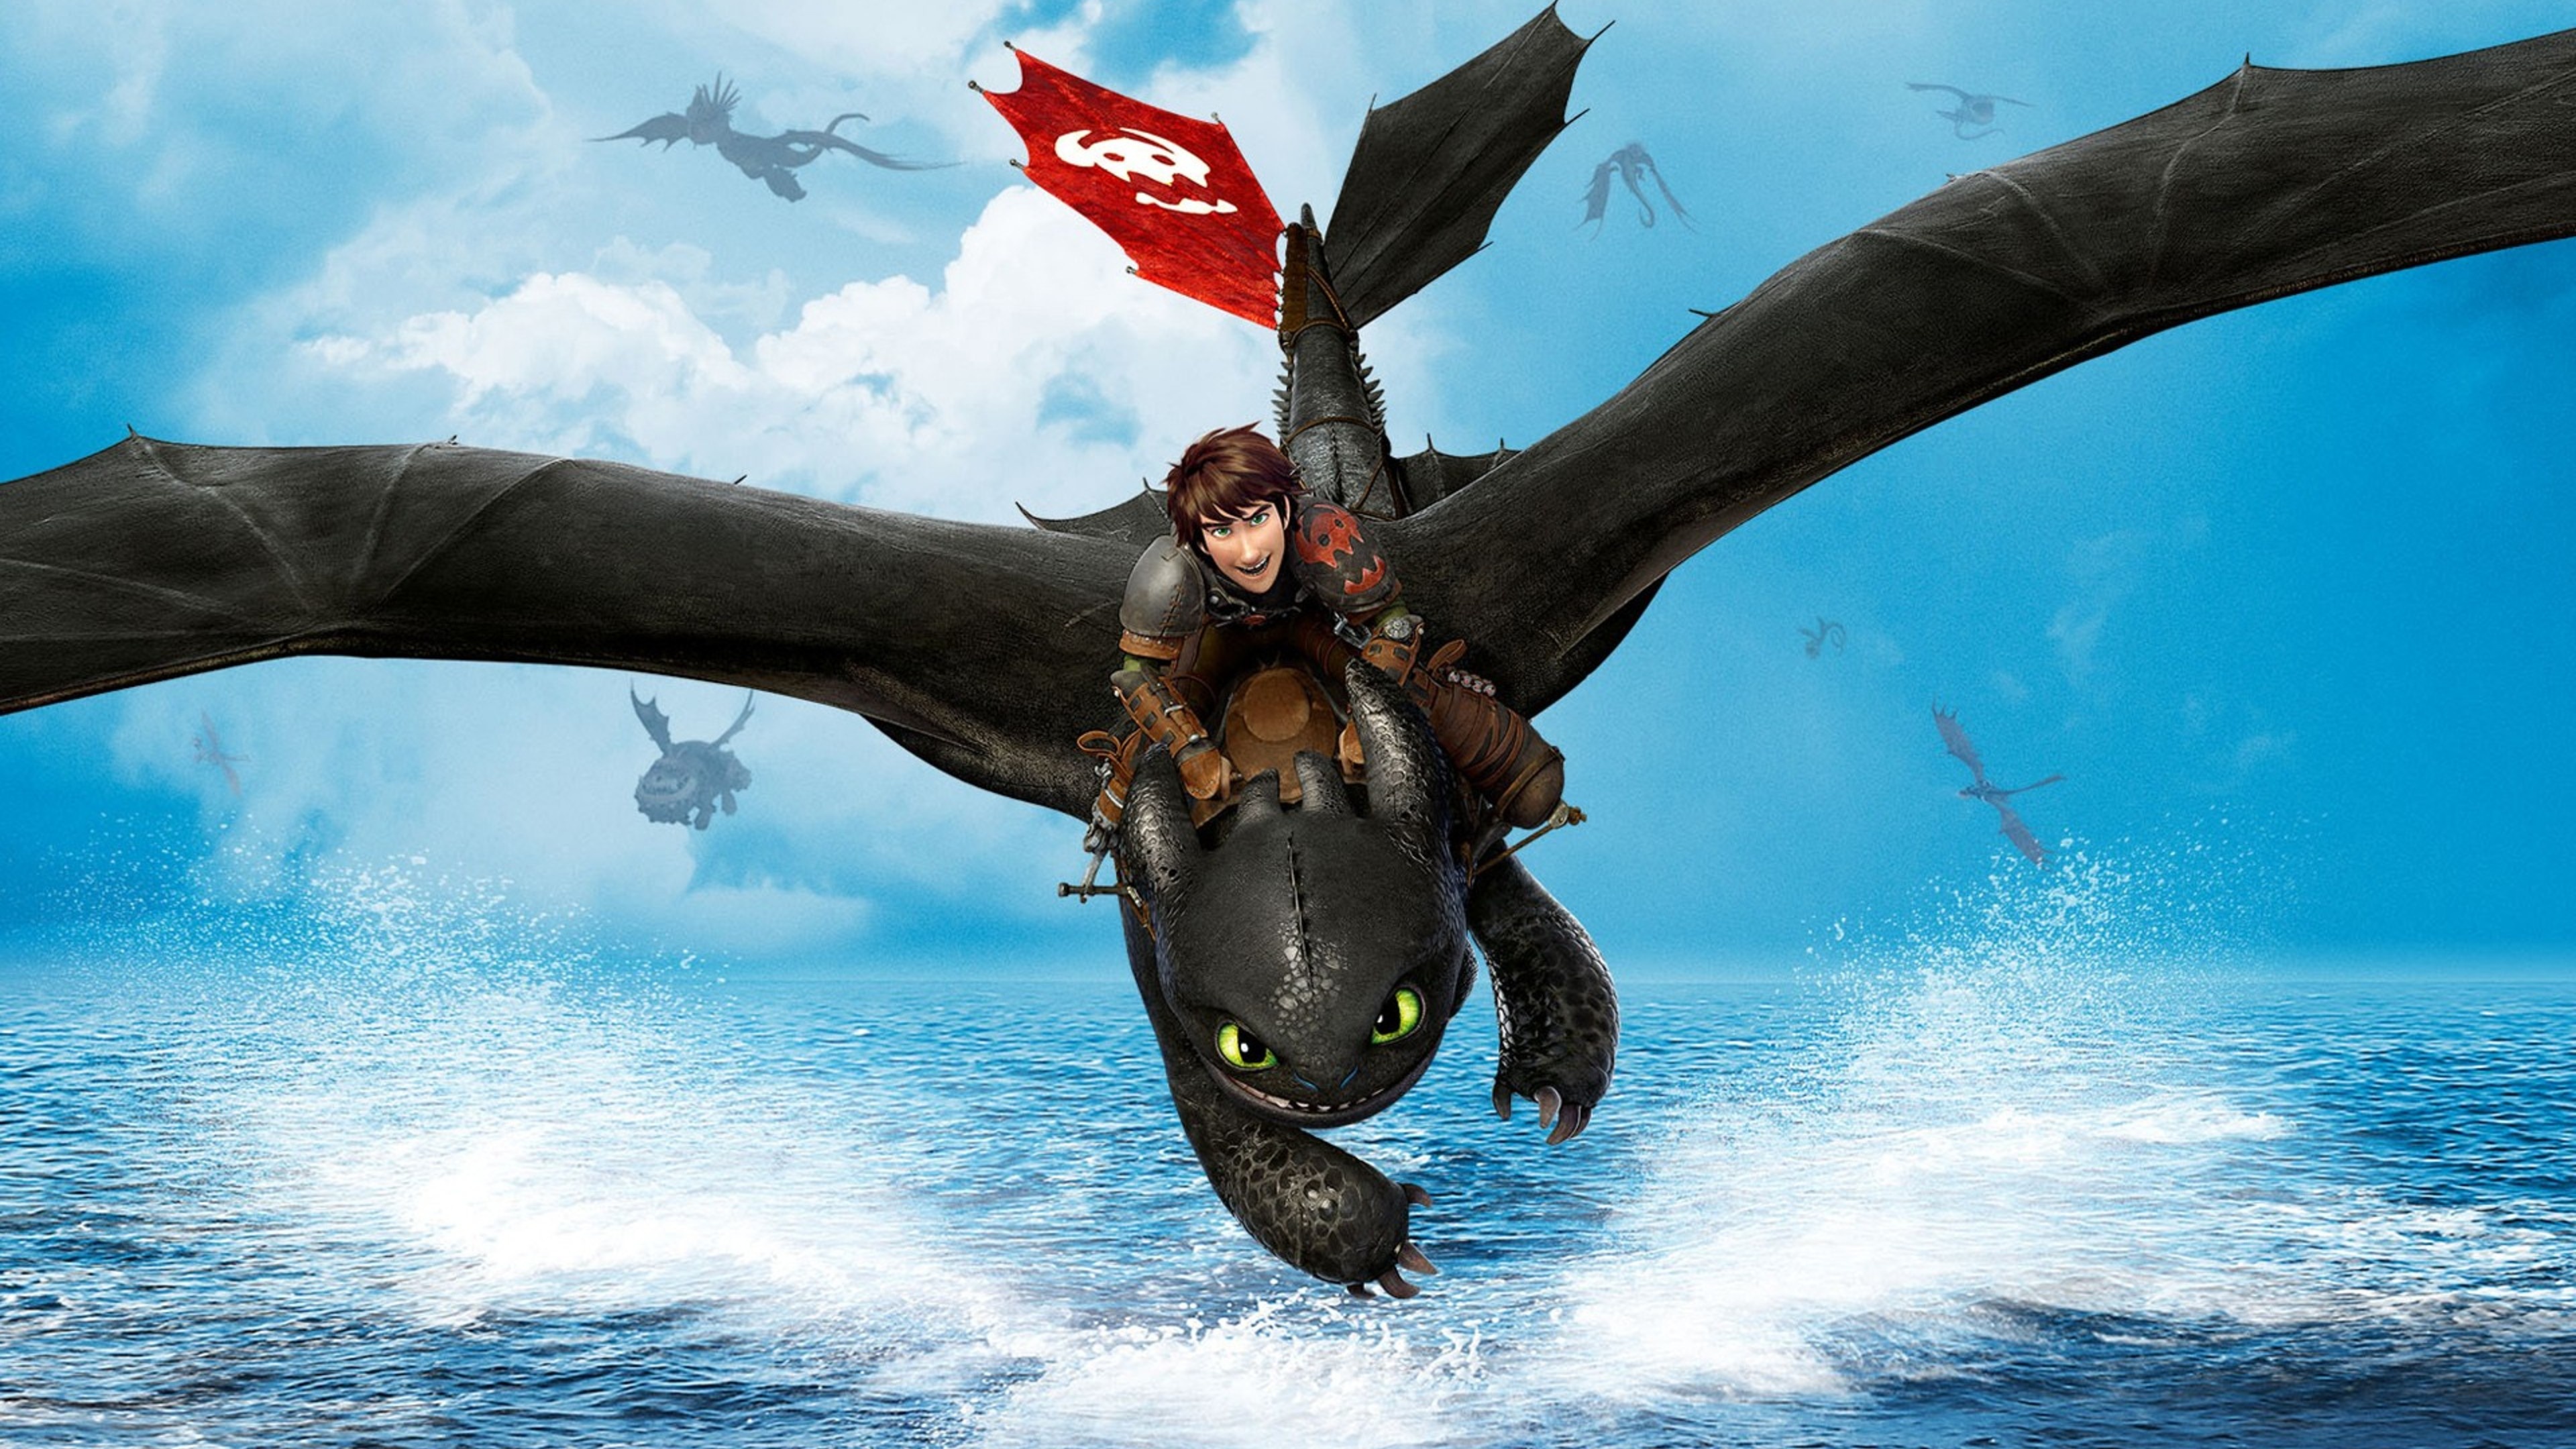 DreamWorks: How To Train Your Dragon 2, Hiccup and his friends. 3840x2160 4K Background.